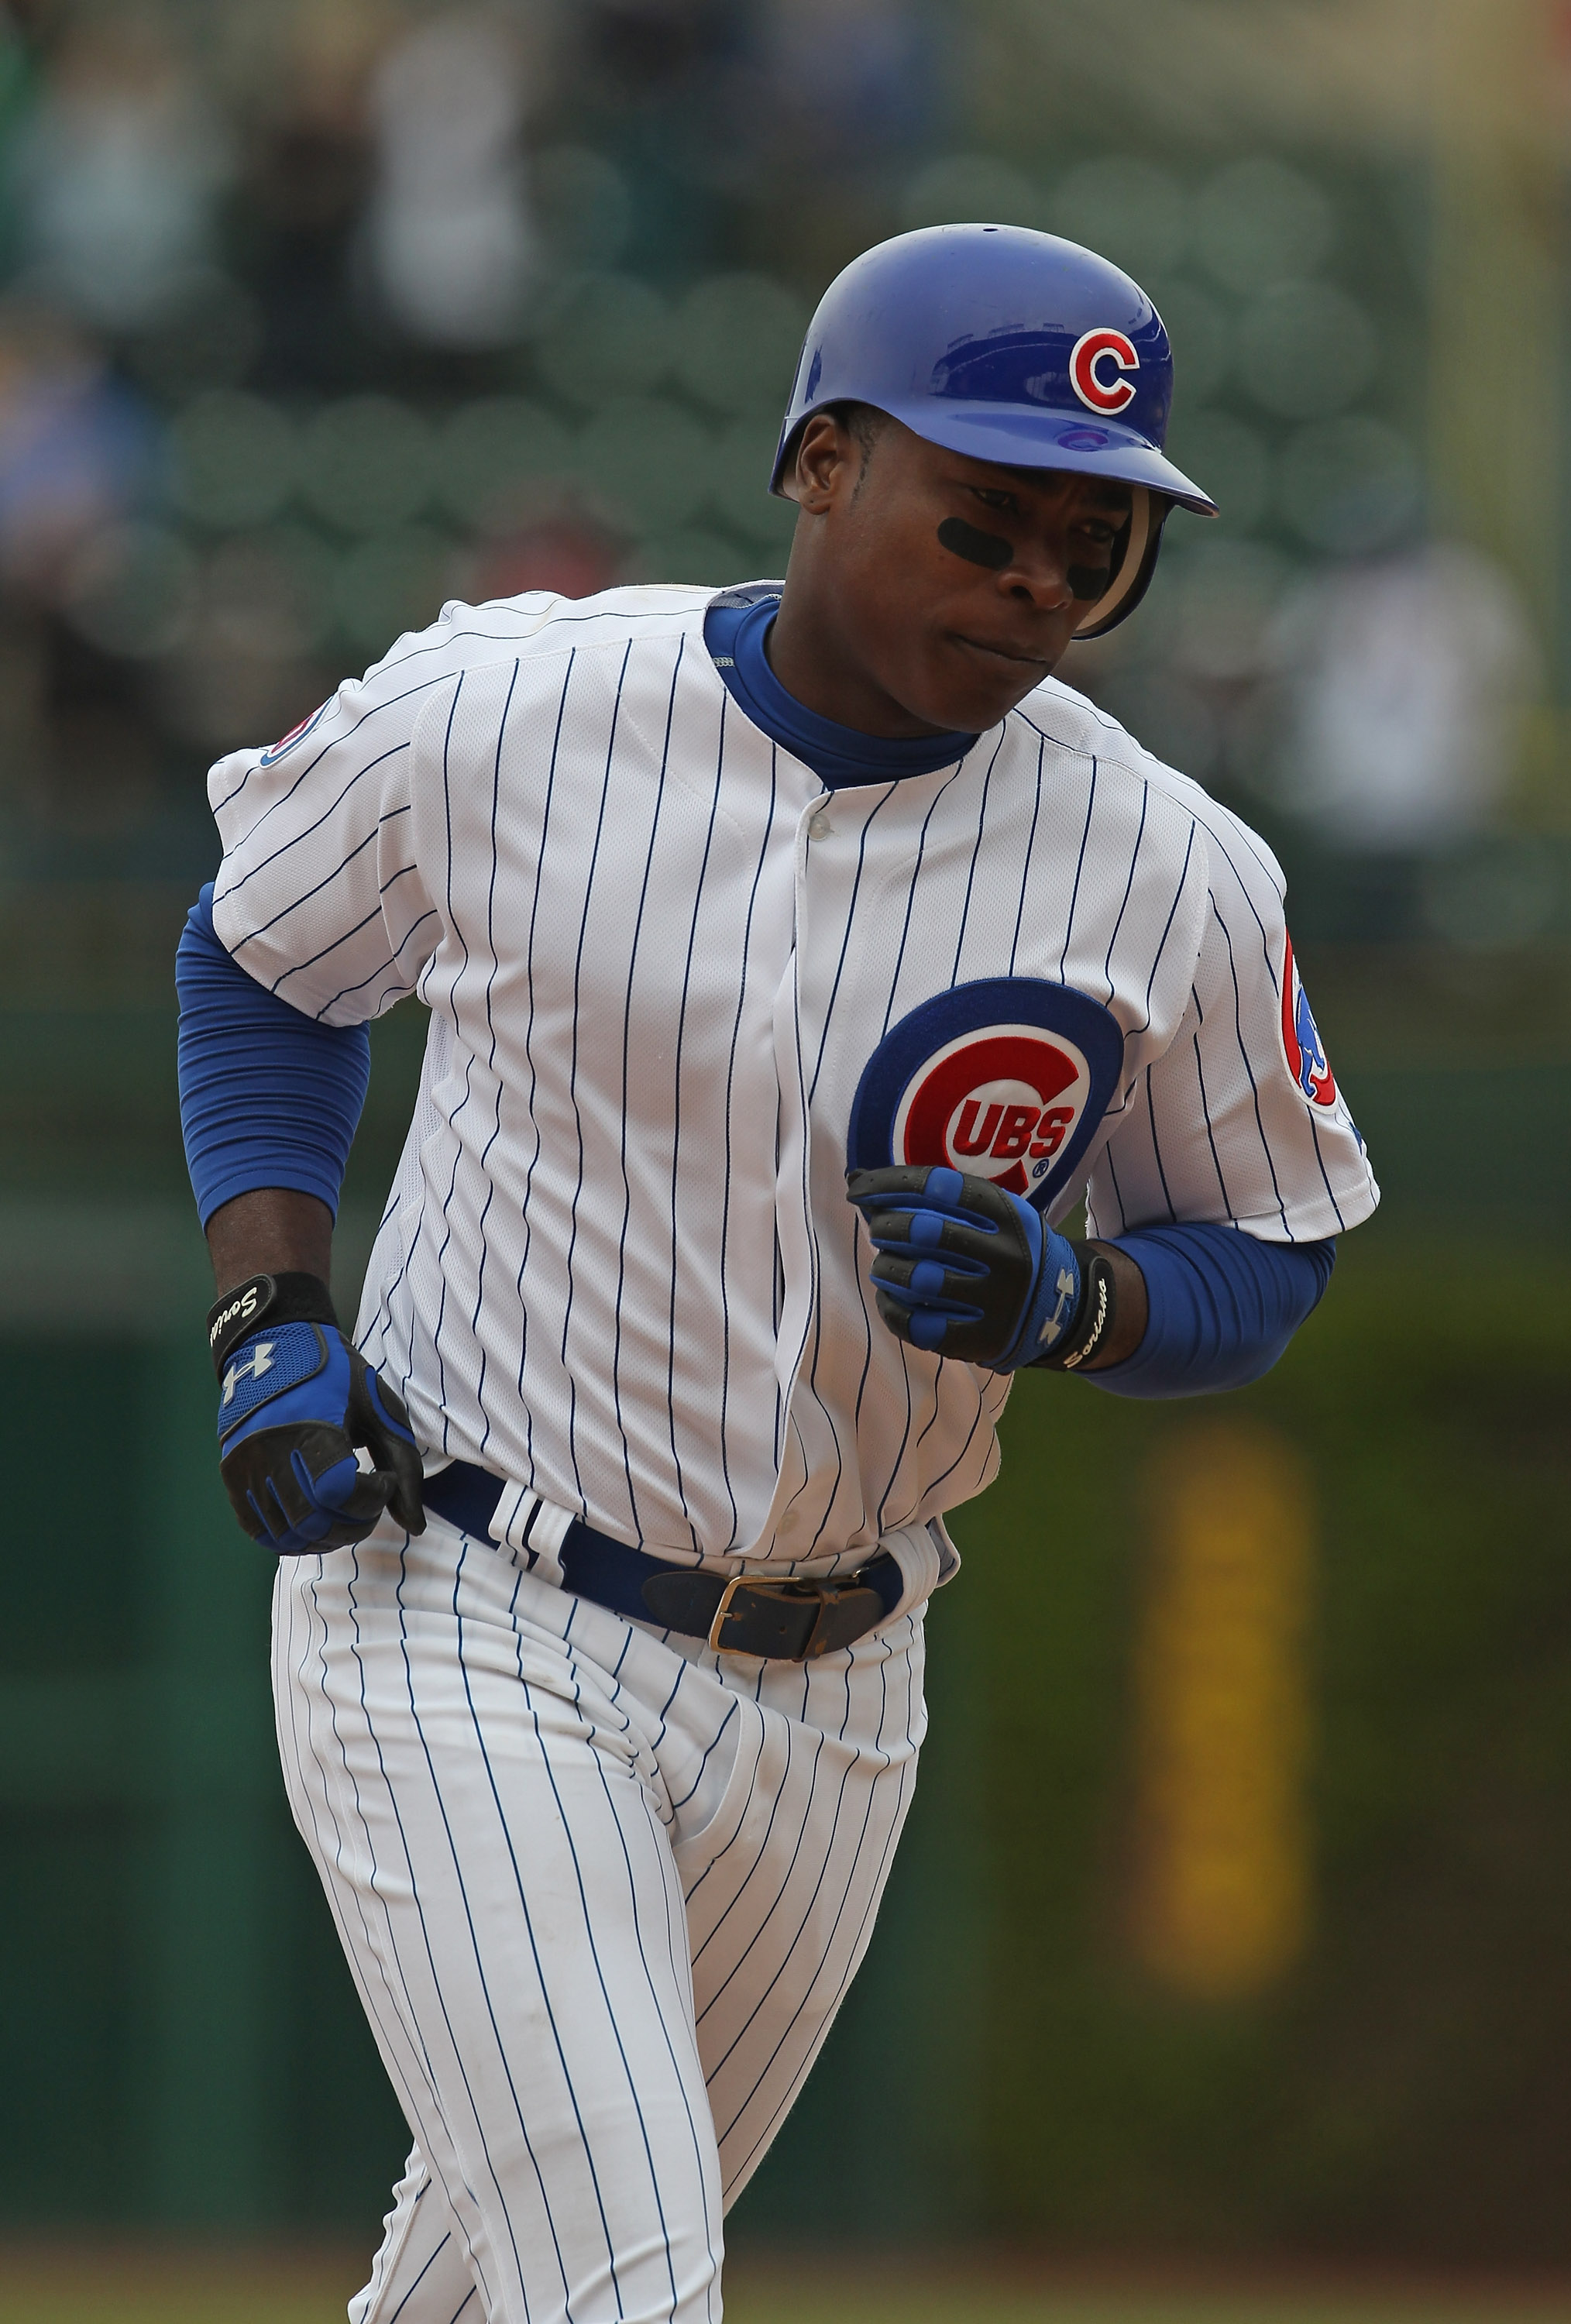 Report: Alfonso Soriano trade 'close' between Yankees, Cubs - Sports  Illustrated